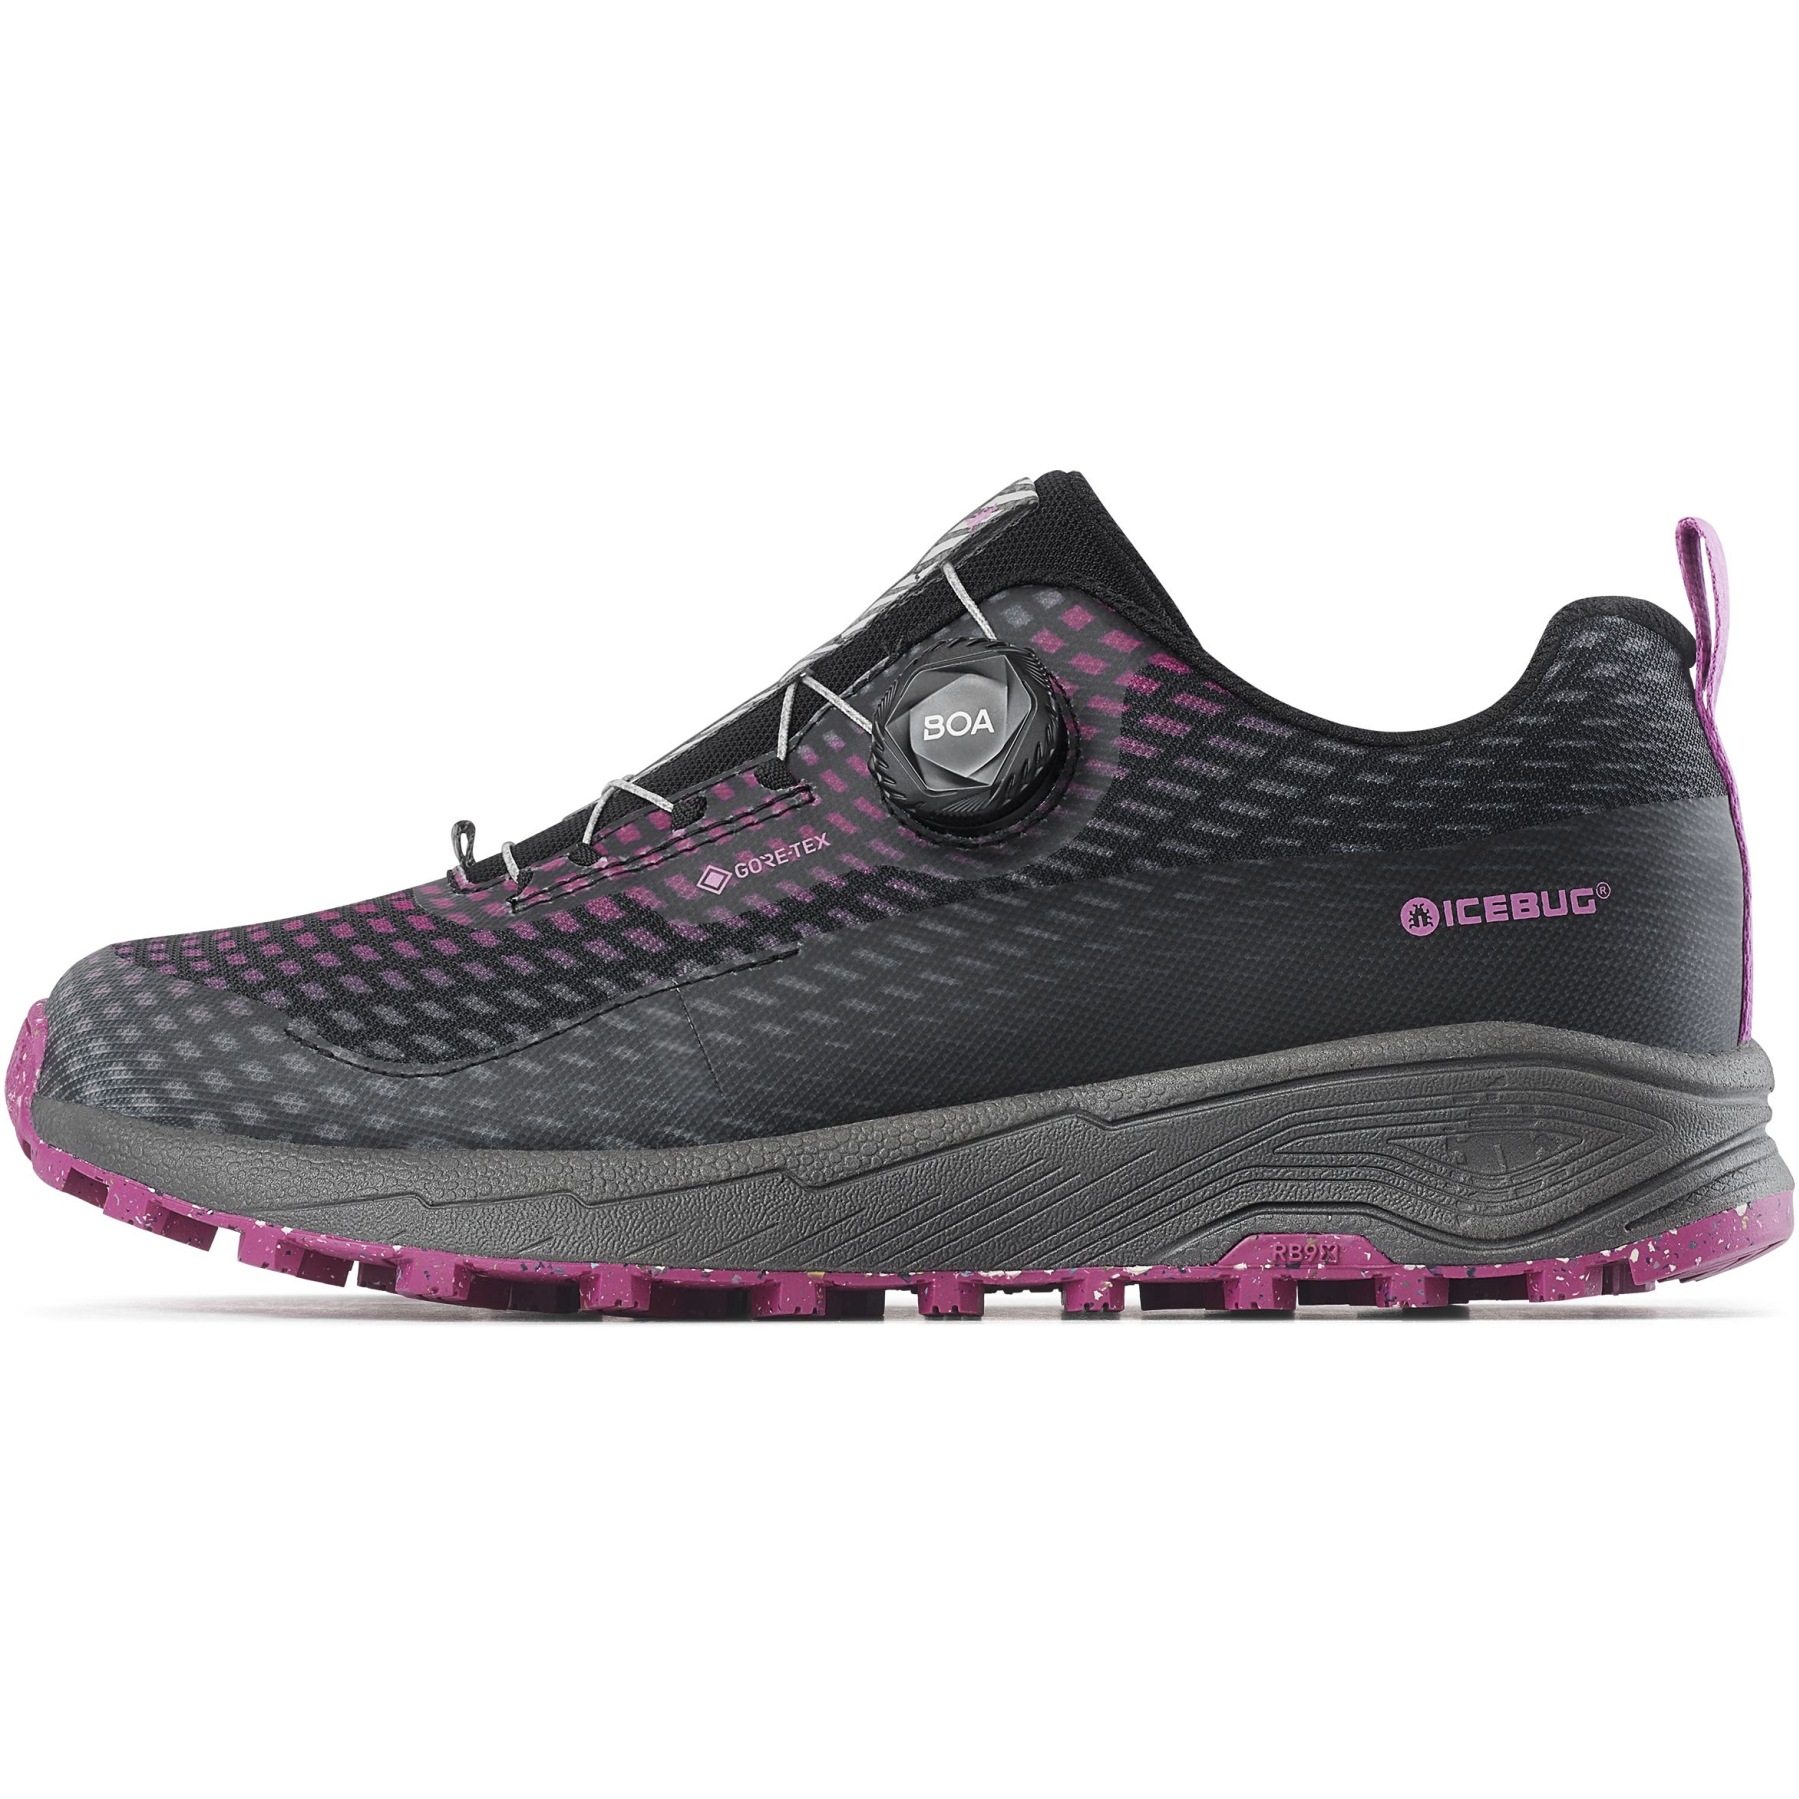 Picture of Icebug Haze RB9X GTX Shoes Women - orchid/stone